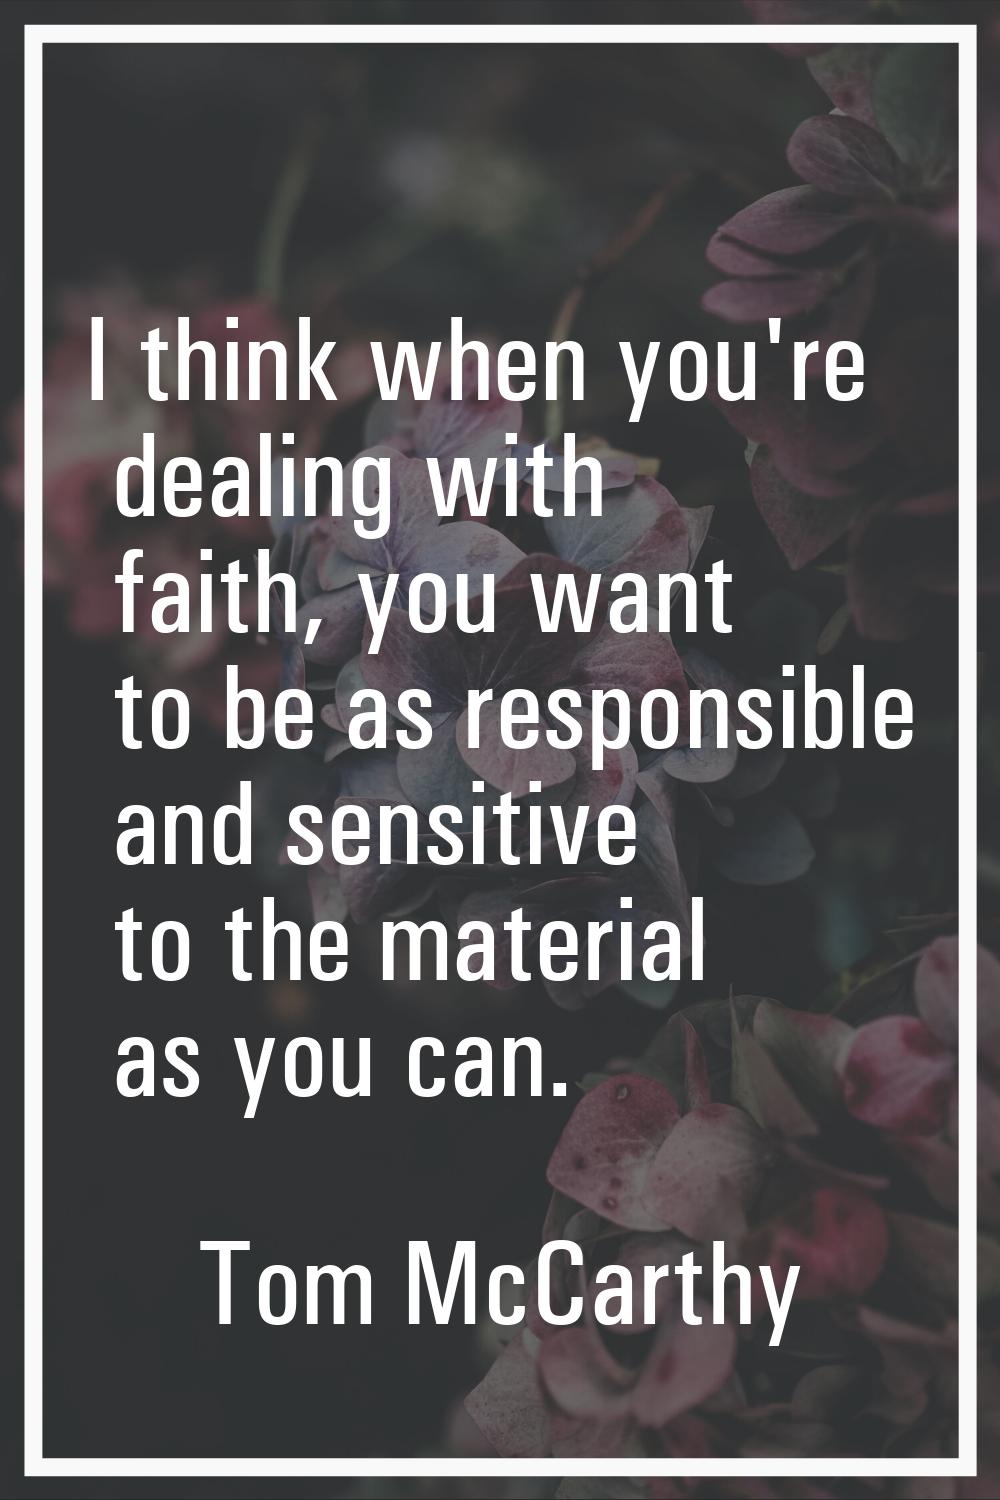 I think when you're dealing with faith, you want to be as responsible and sensitive to the material